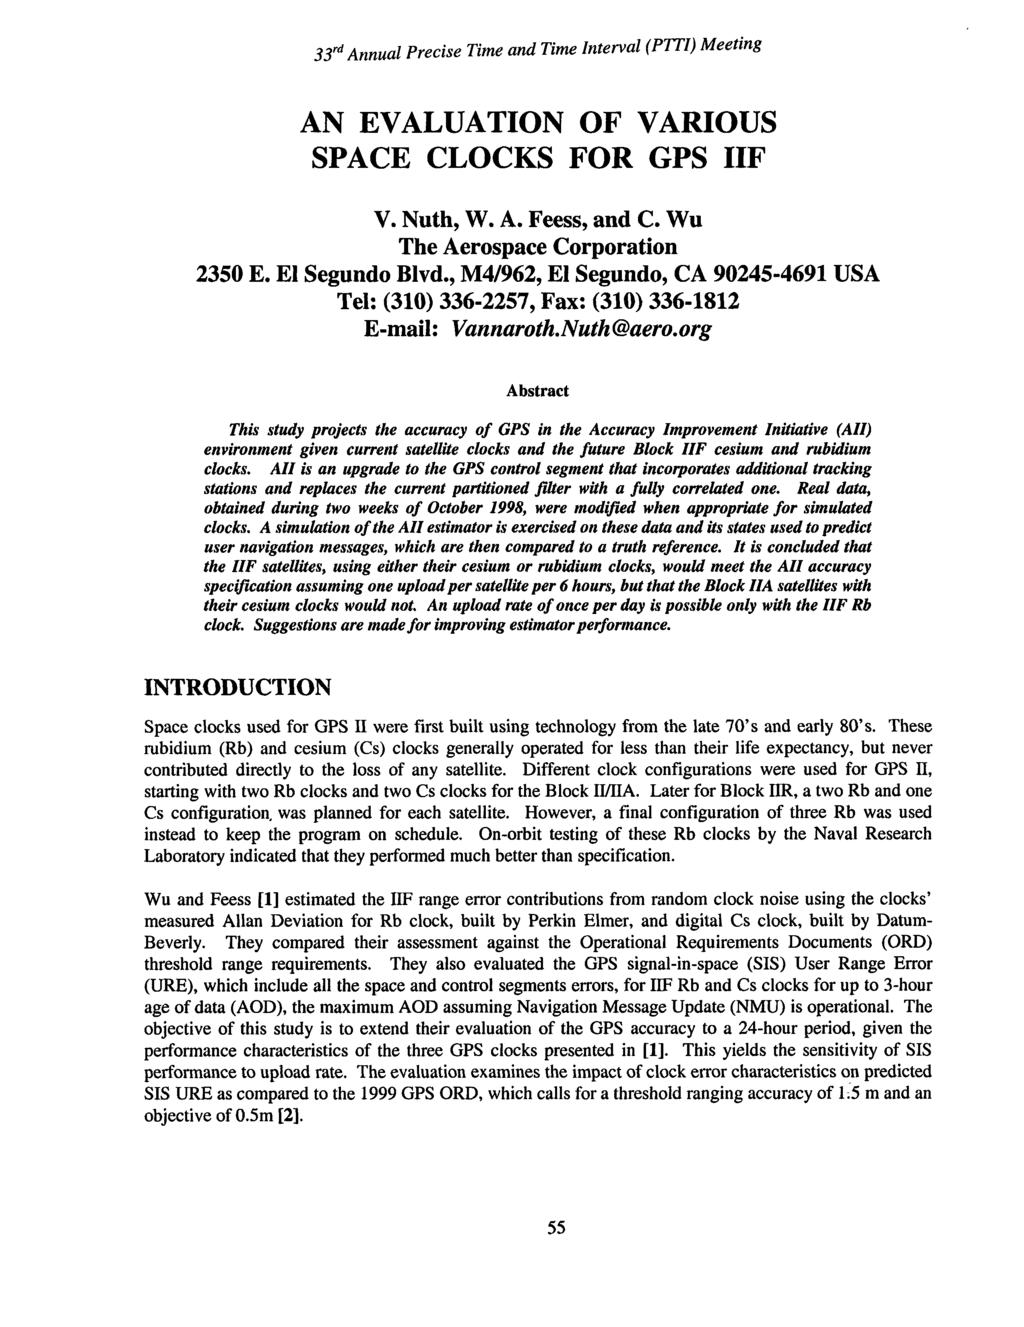 33rdAnnual Precise Time and Time Interval ( P P I )Meeting AN EVALUATION OF VARIOUS SPACE CLOCKS FOR GPS IIF V. Nuth, W. A. Feess, and C. Wu The Aerospace Corporation 2350 E. El Segundo Blvd.